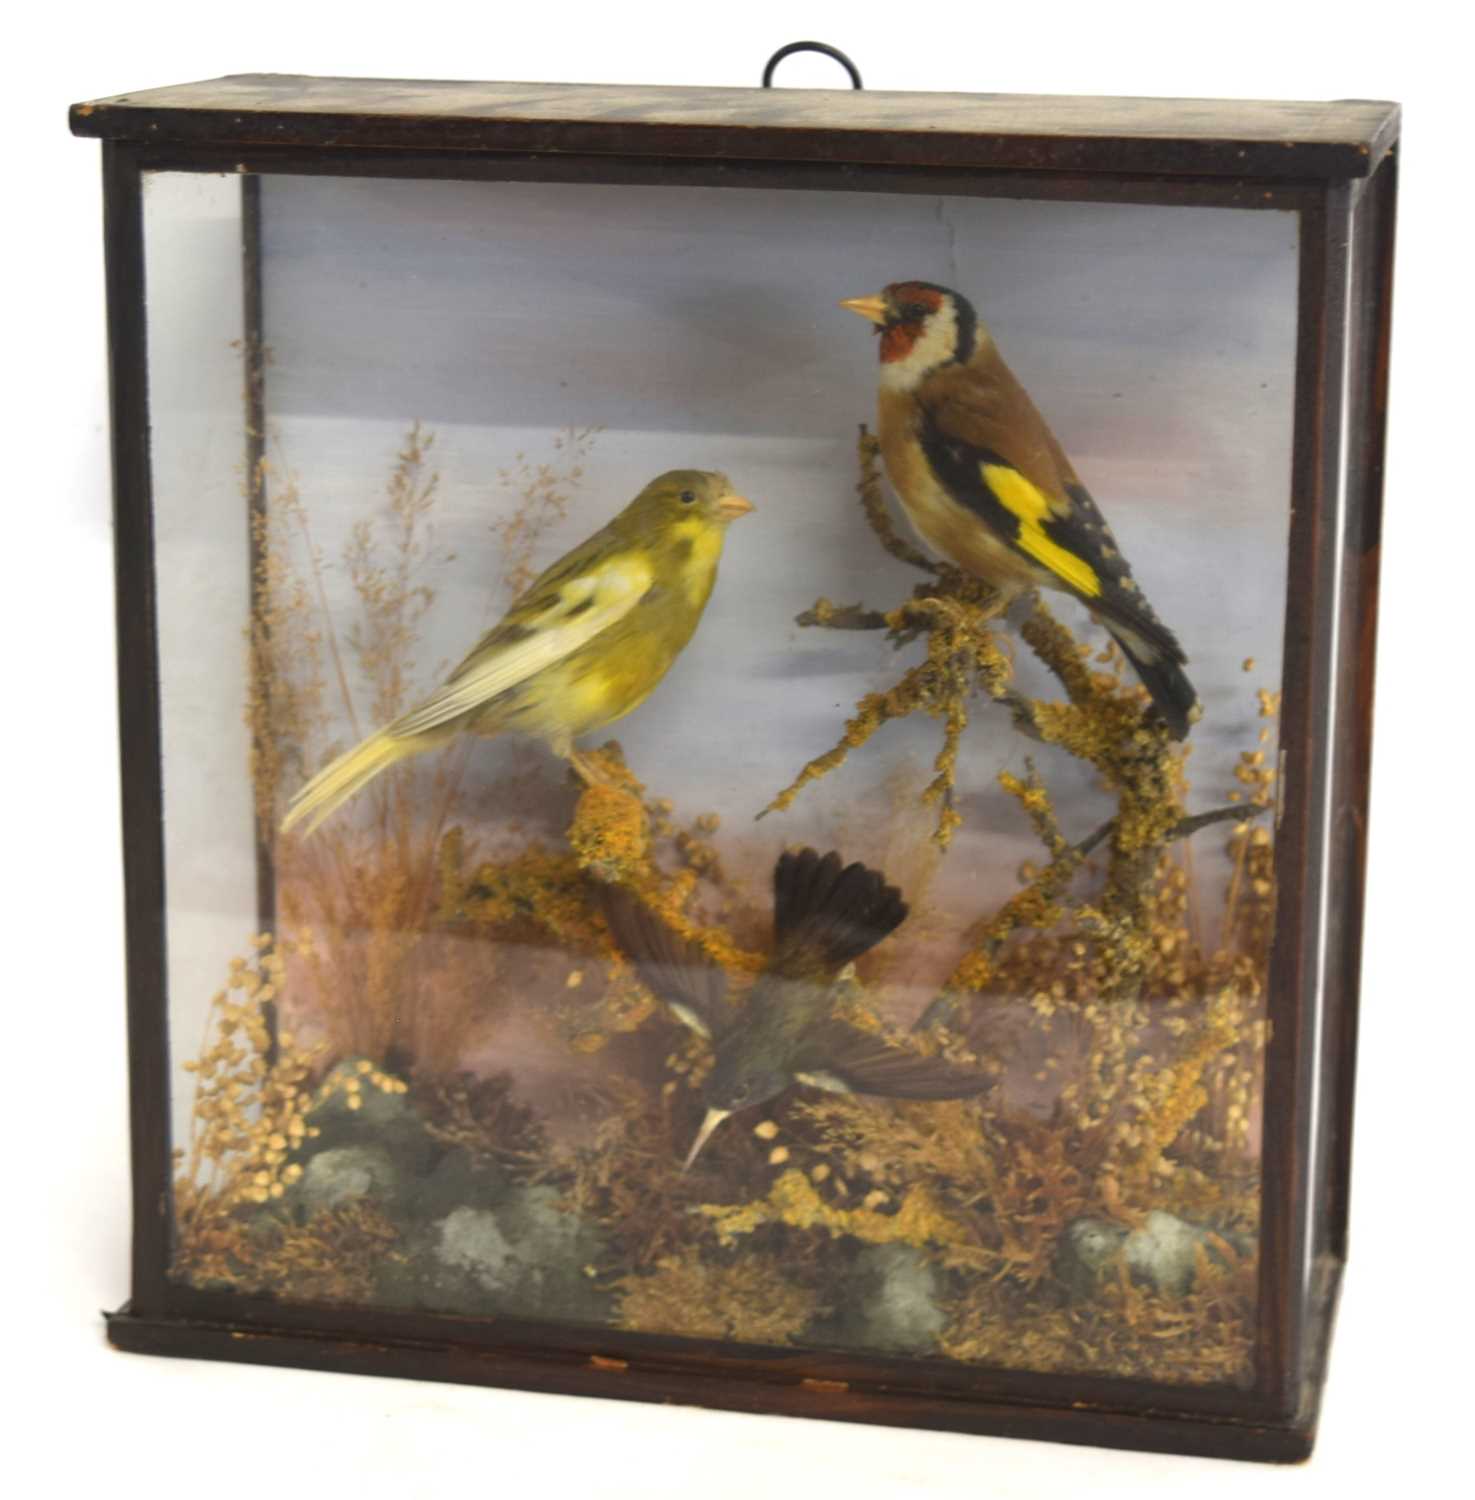 Late 19th /Early 20th century taxidermy naturalistic setting case of a gold finch, Canary, and a - Image 2 of 5